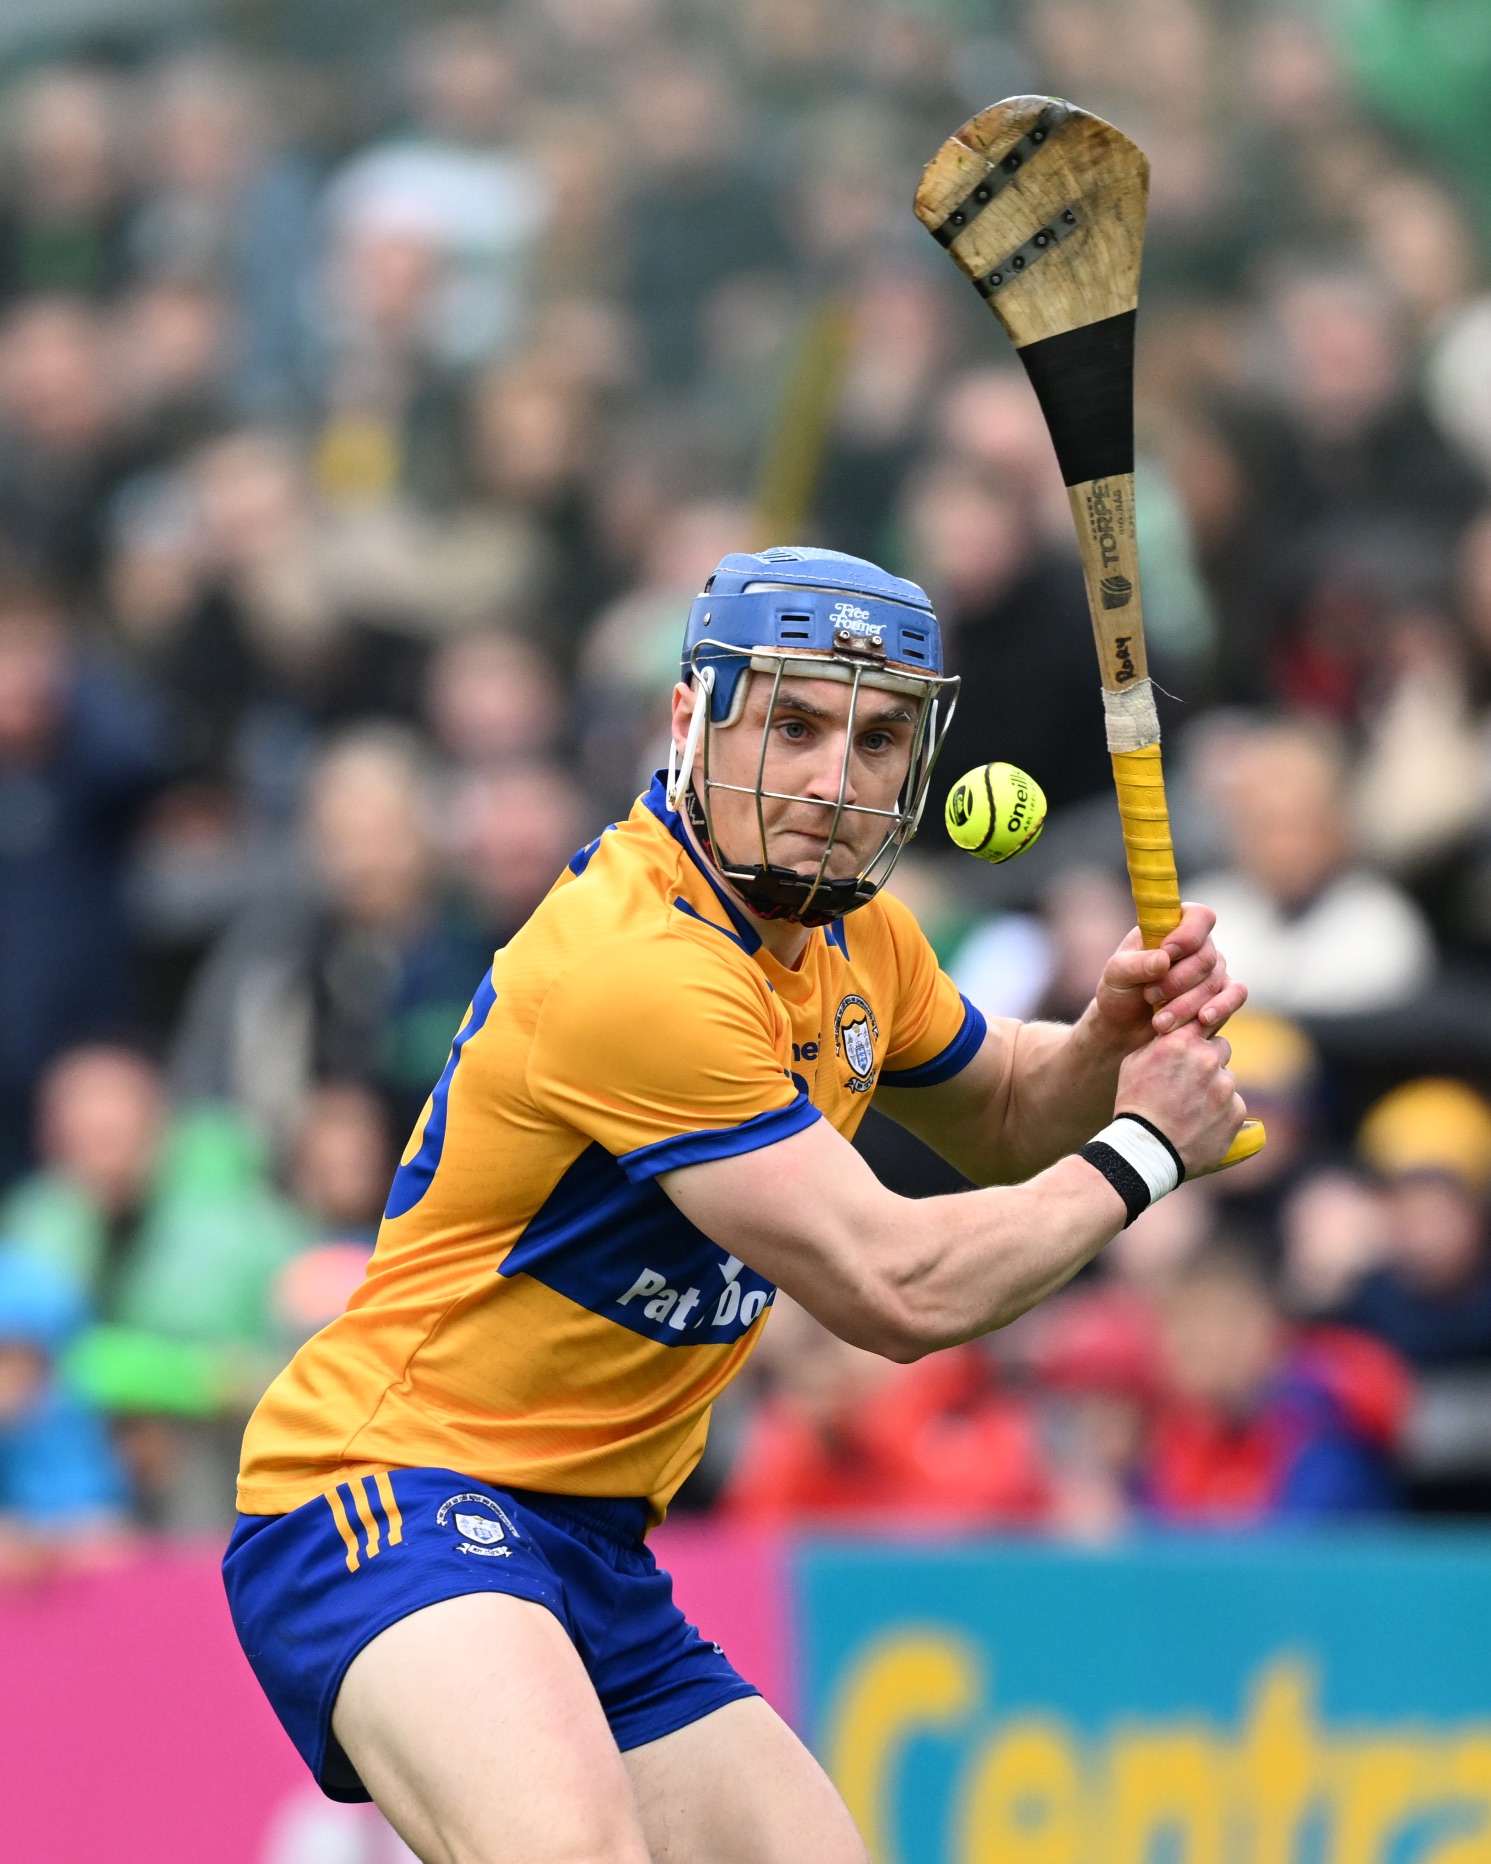 Clare's National Hurling And Football League Fixtures Confirmed - Clare FM